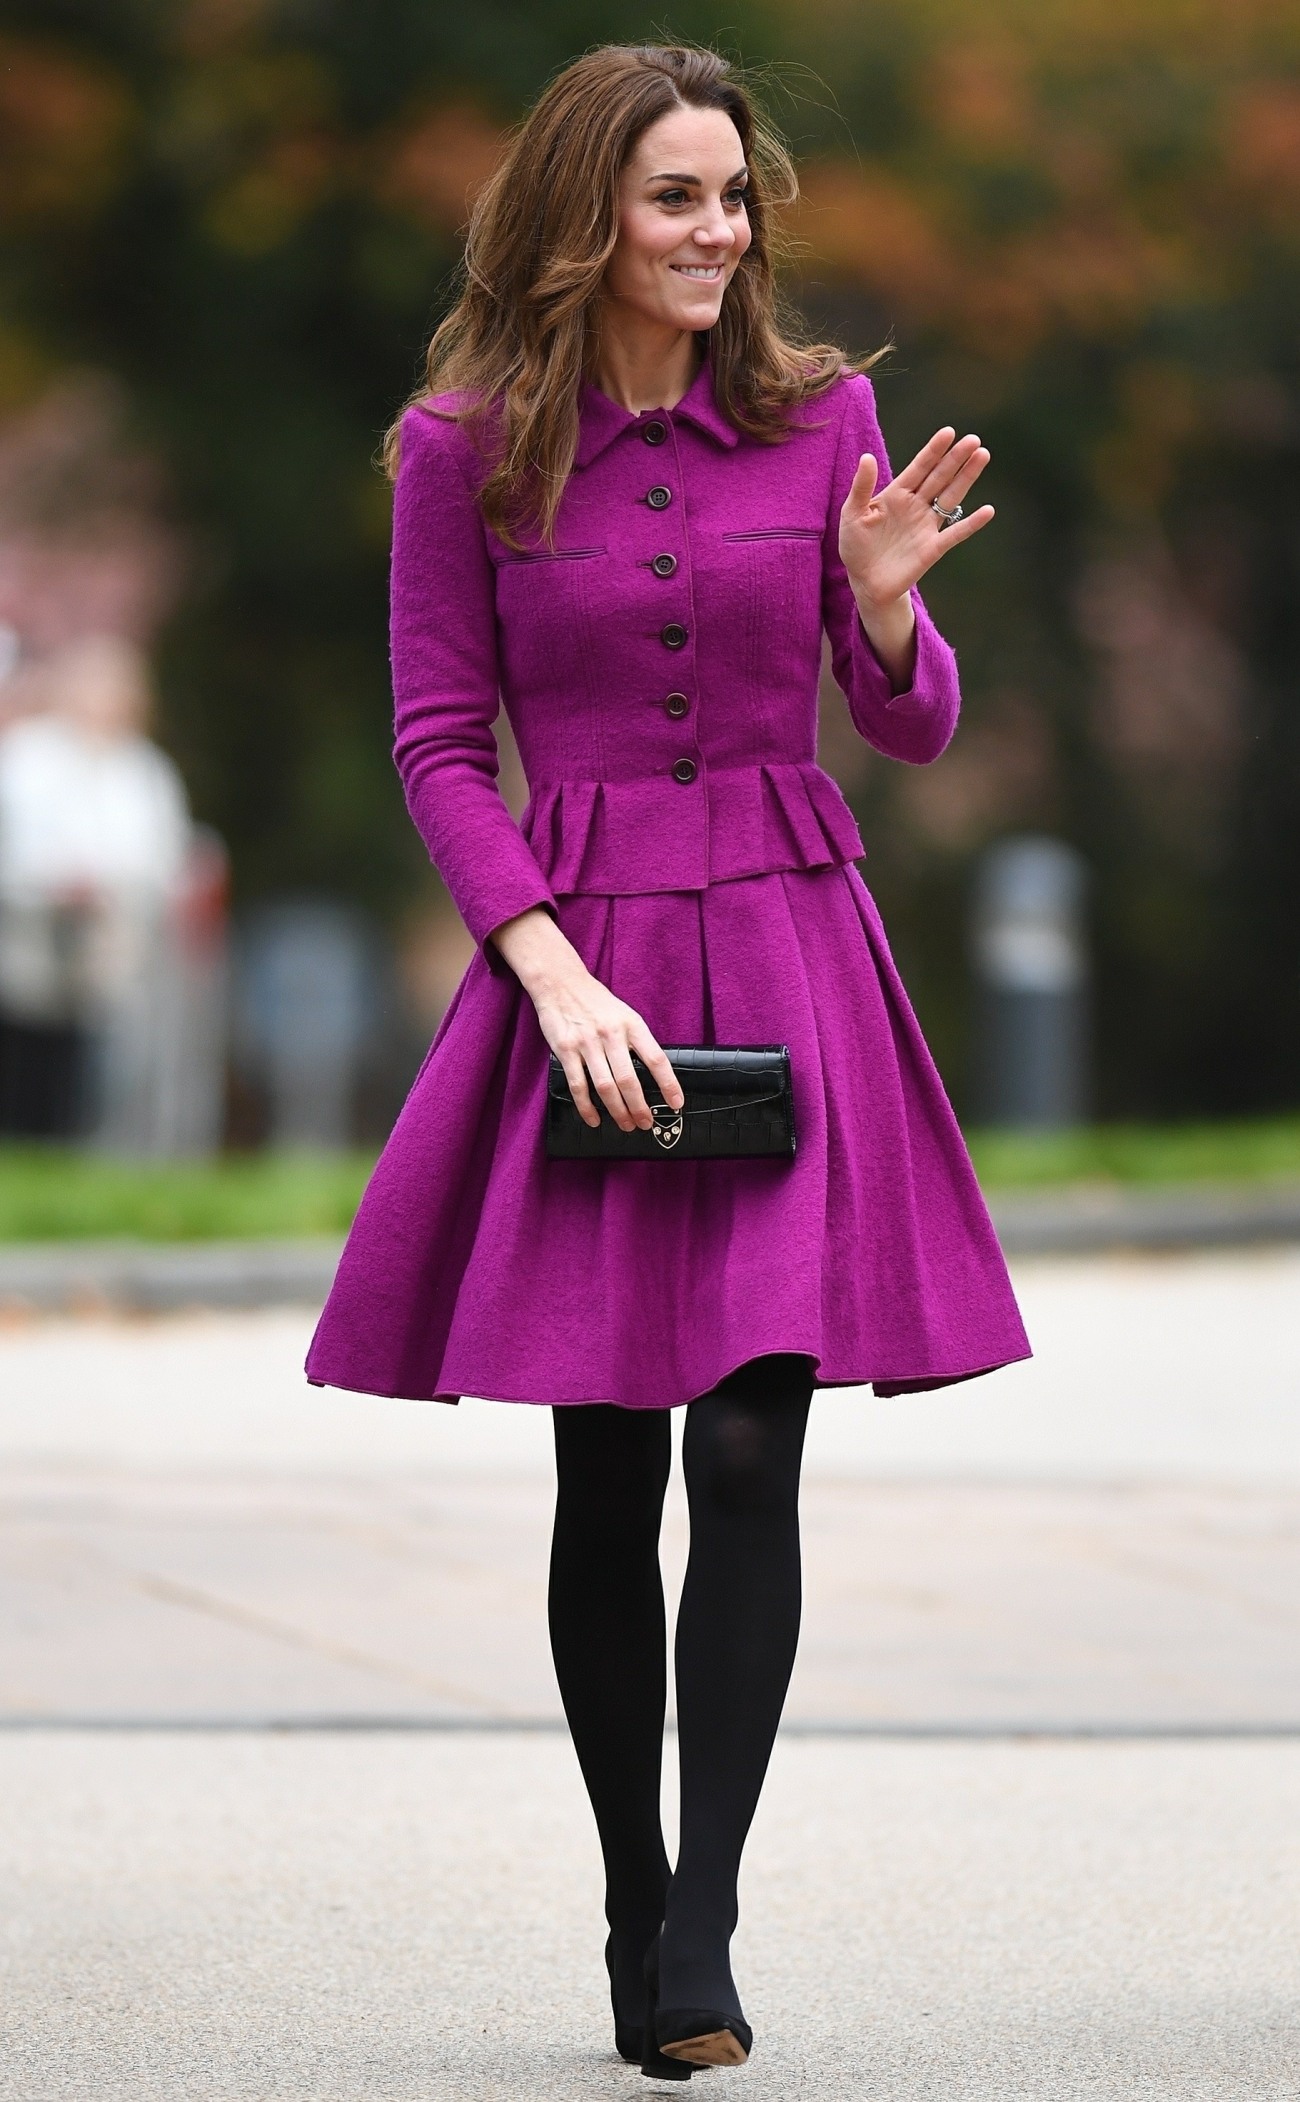 The Duchess of Cambridge, Kate Middleton opens The Nook Children's Hospice